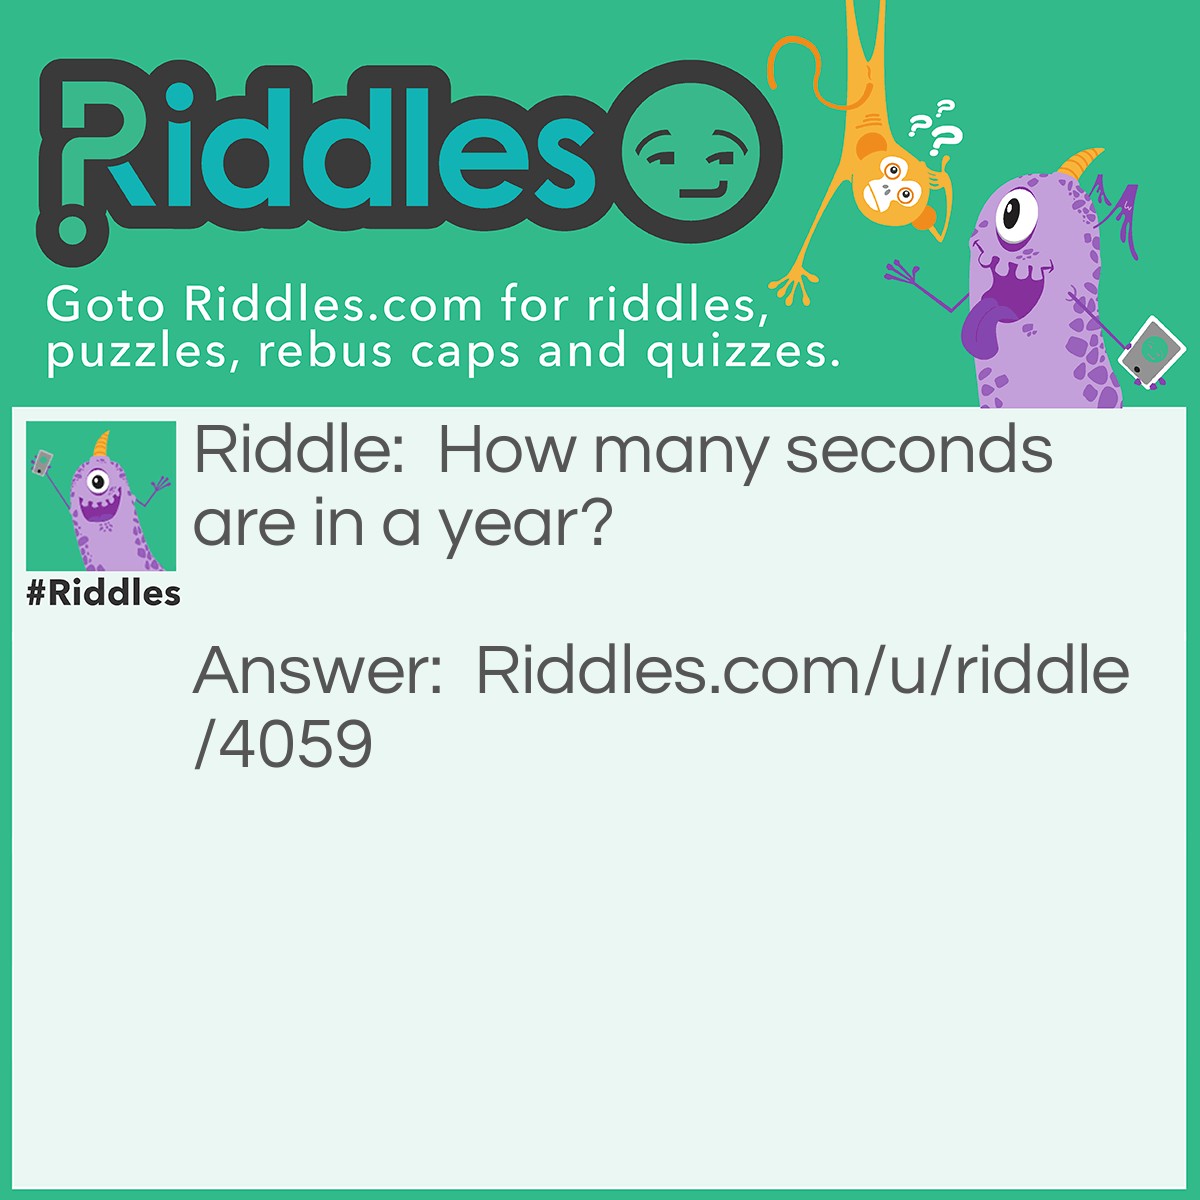 Riddle: How many seconds are in a year? Answer: 12! January 2, February 2, March 2, you get the point.